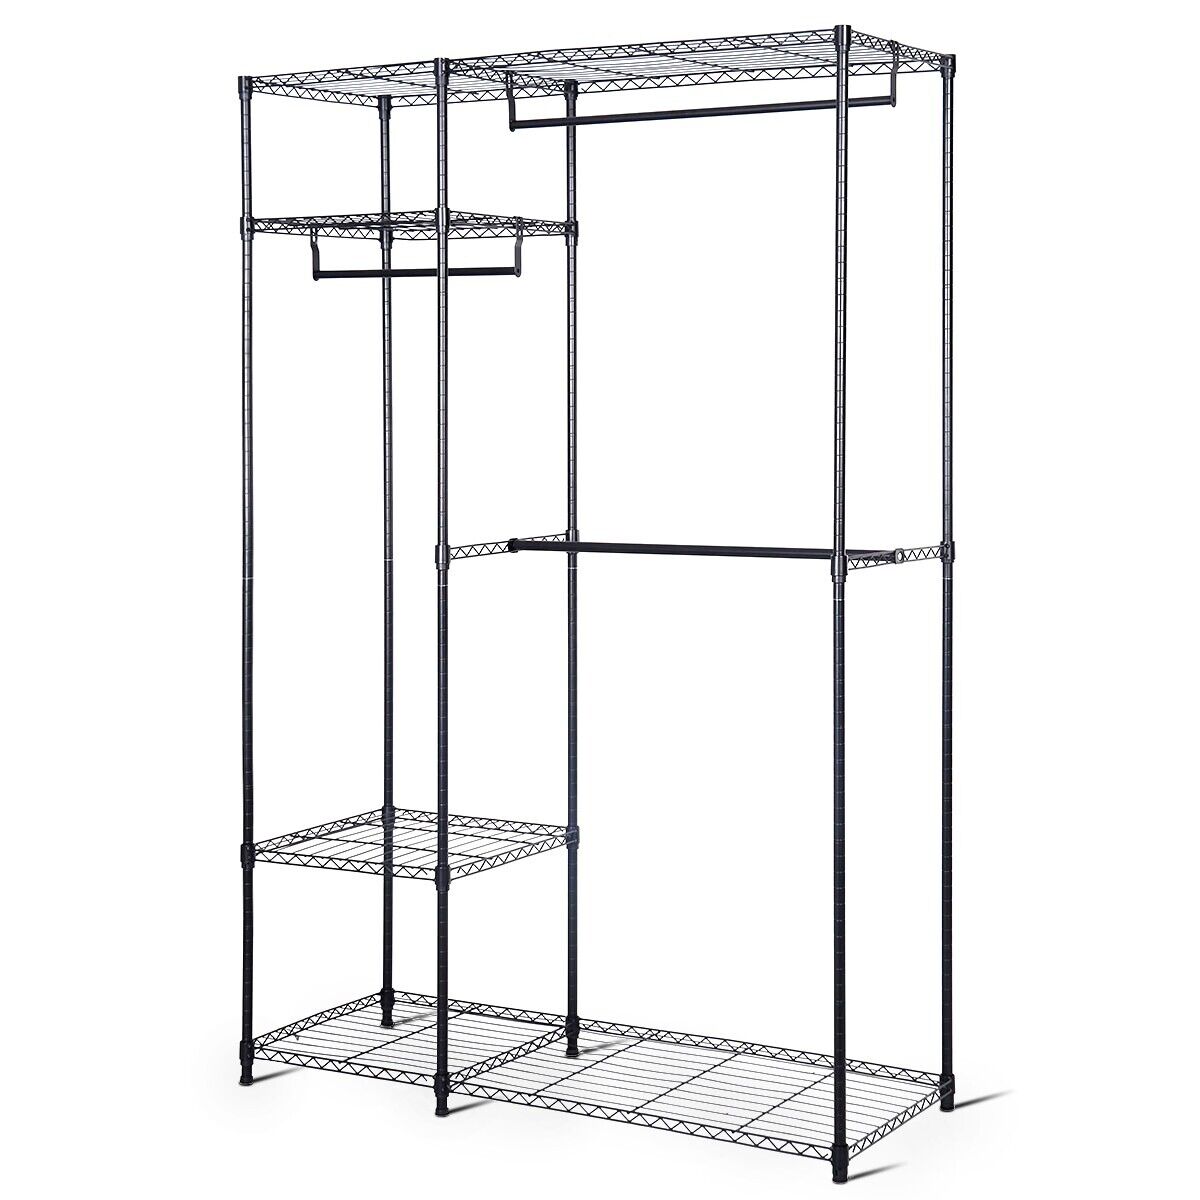 Clothes Rail, Metal Clothes Rack with 3 Hanging Rails and Shelves for Bedroom, Black, Costway, 2